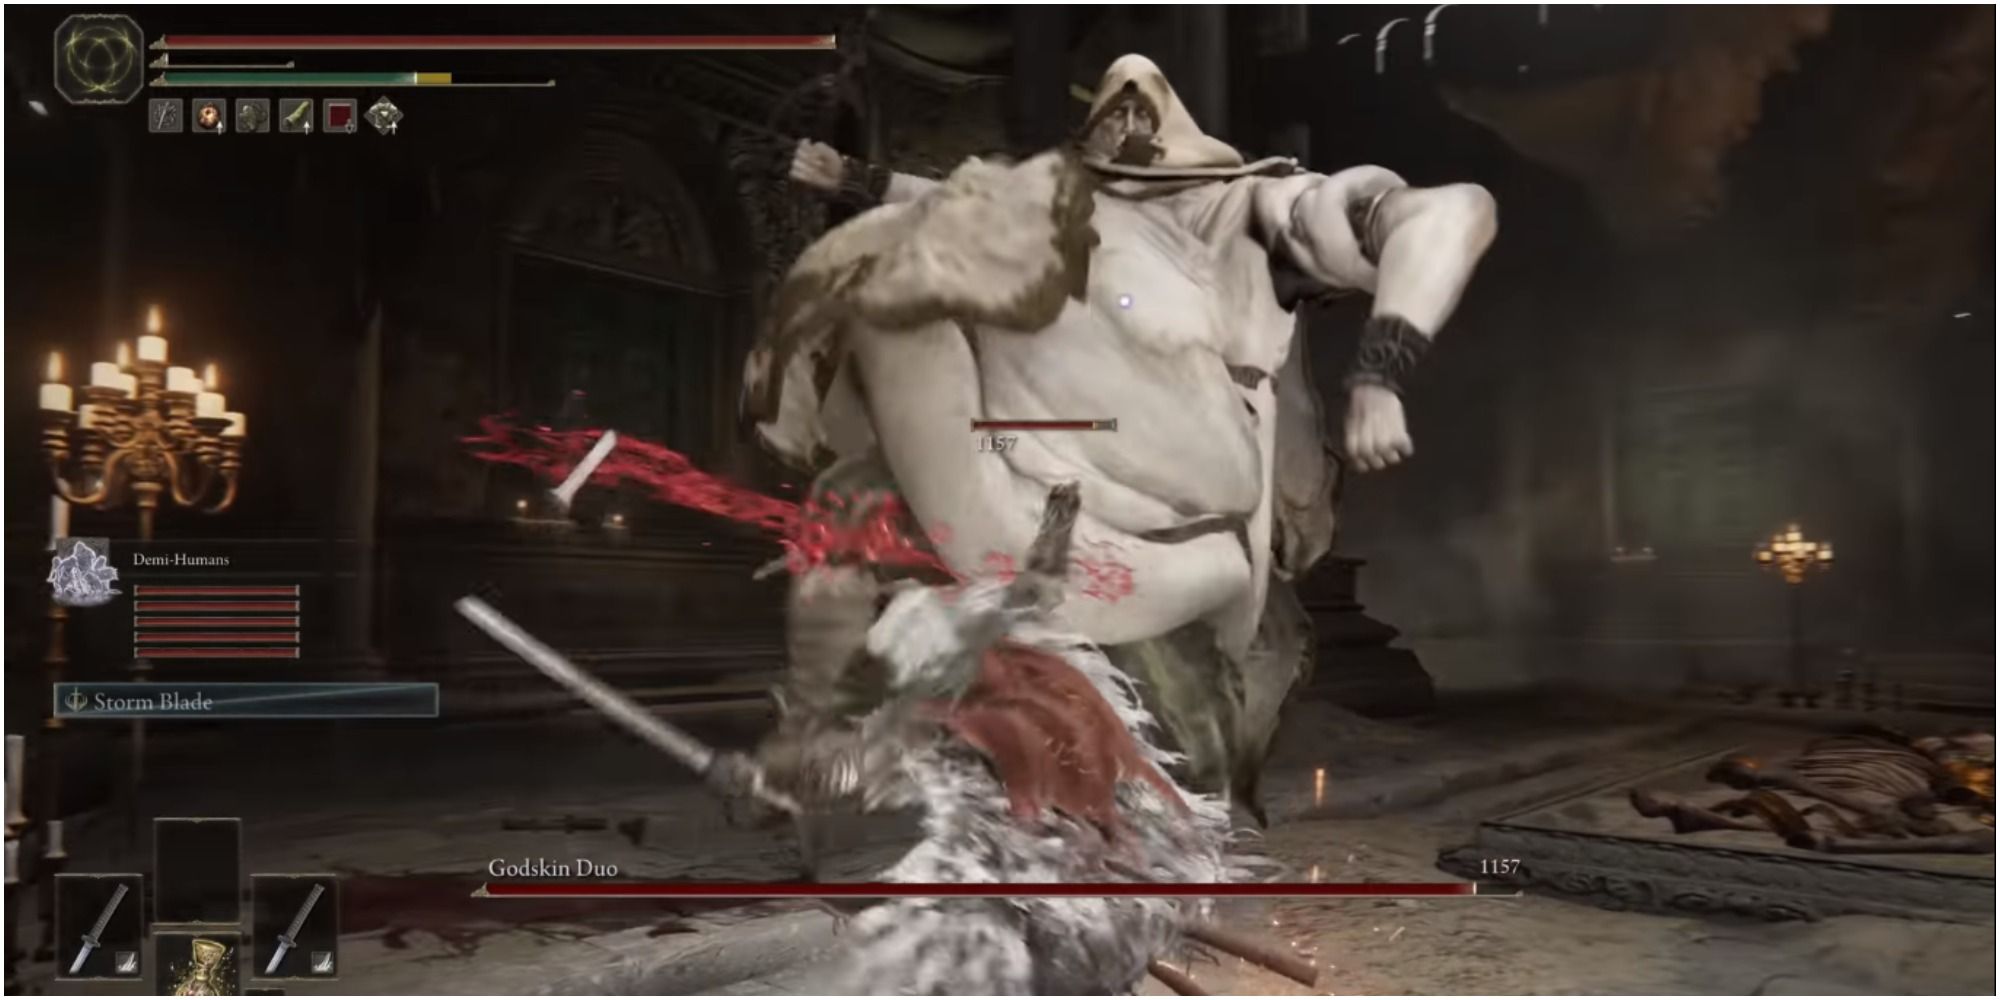 Tarnished attacking the boss with a melee weapon.